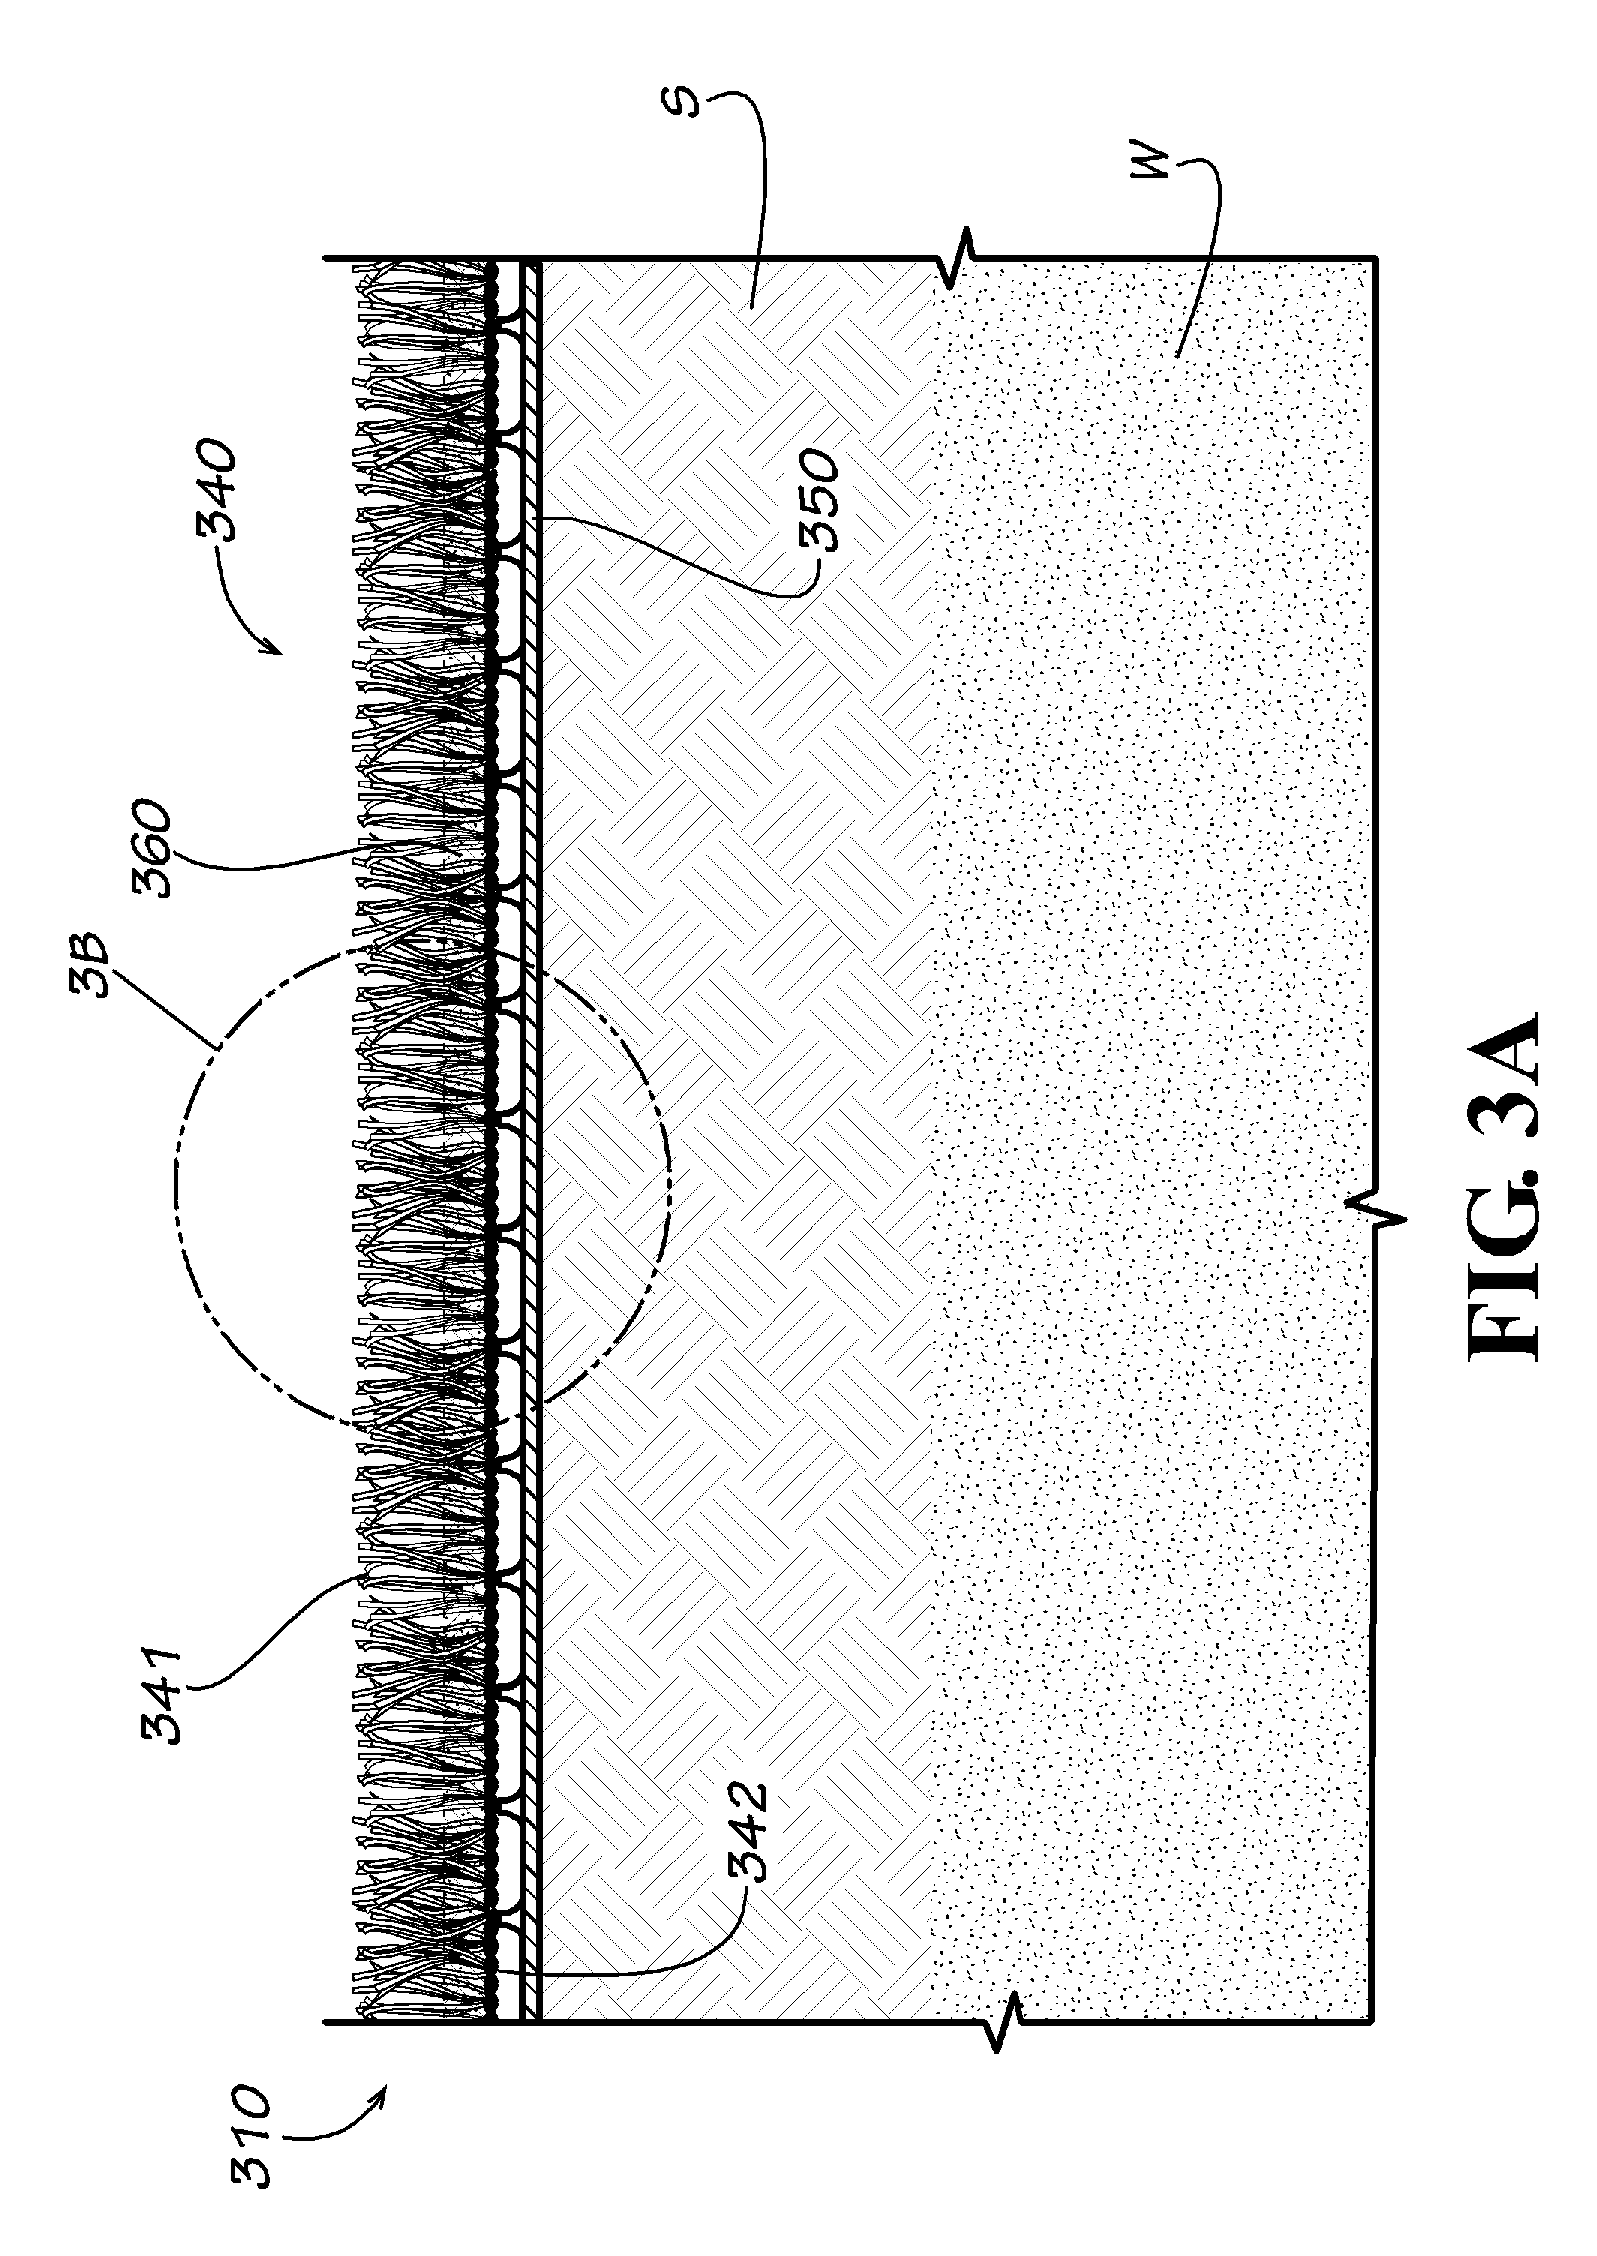 Synthetic ground cover system with binding infill for erosion control